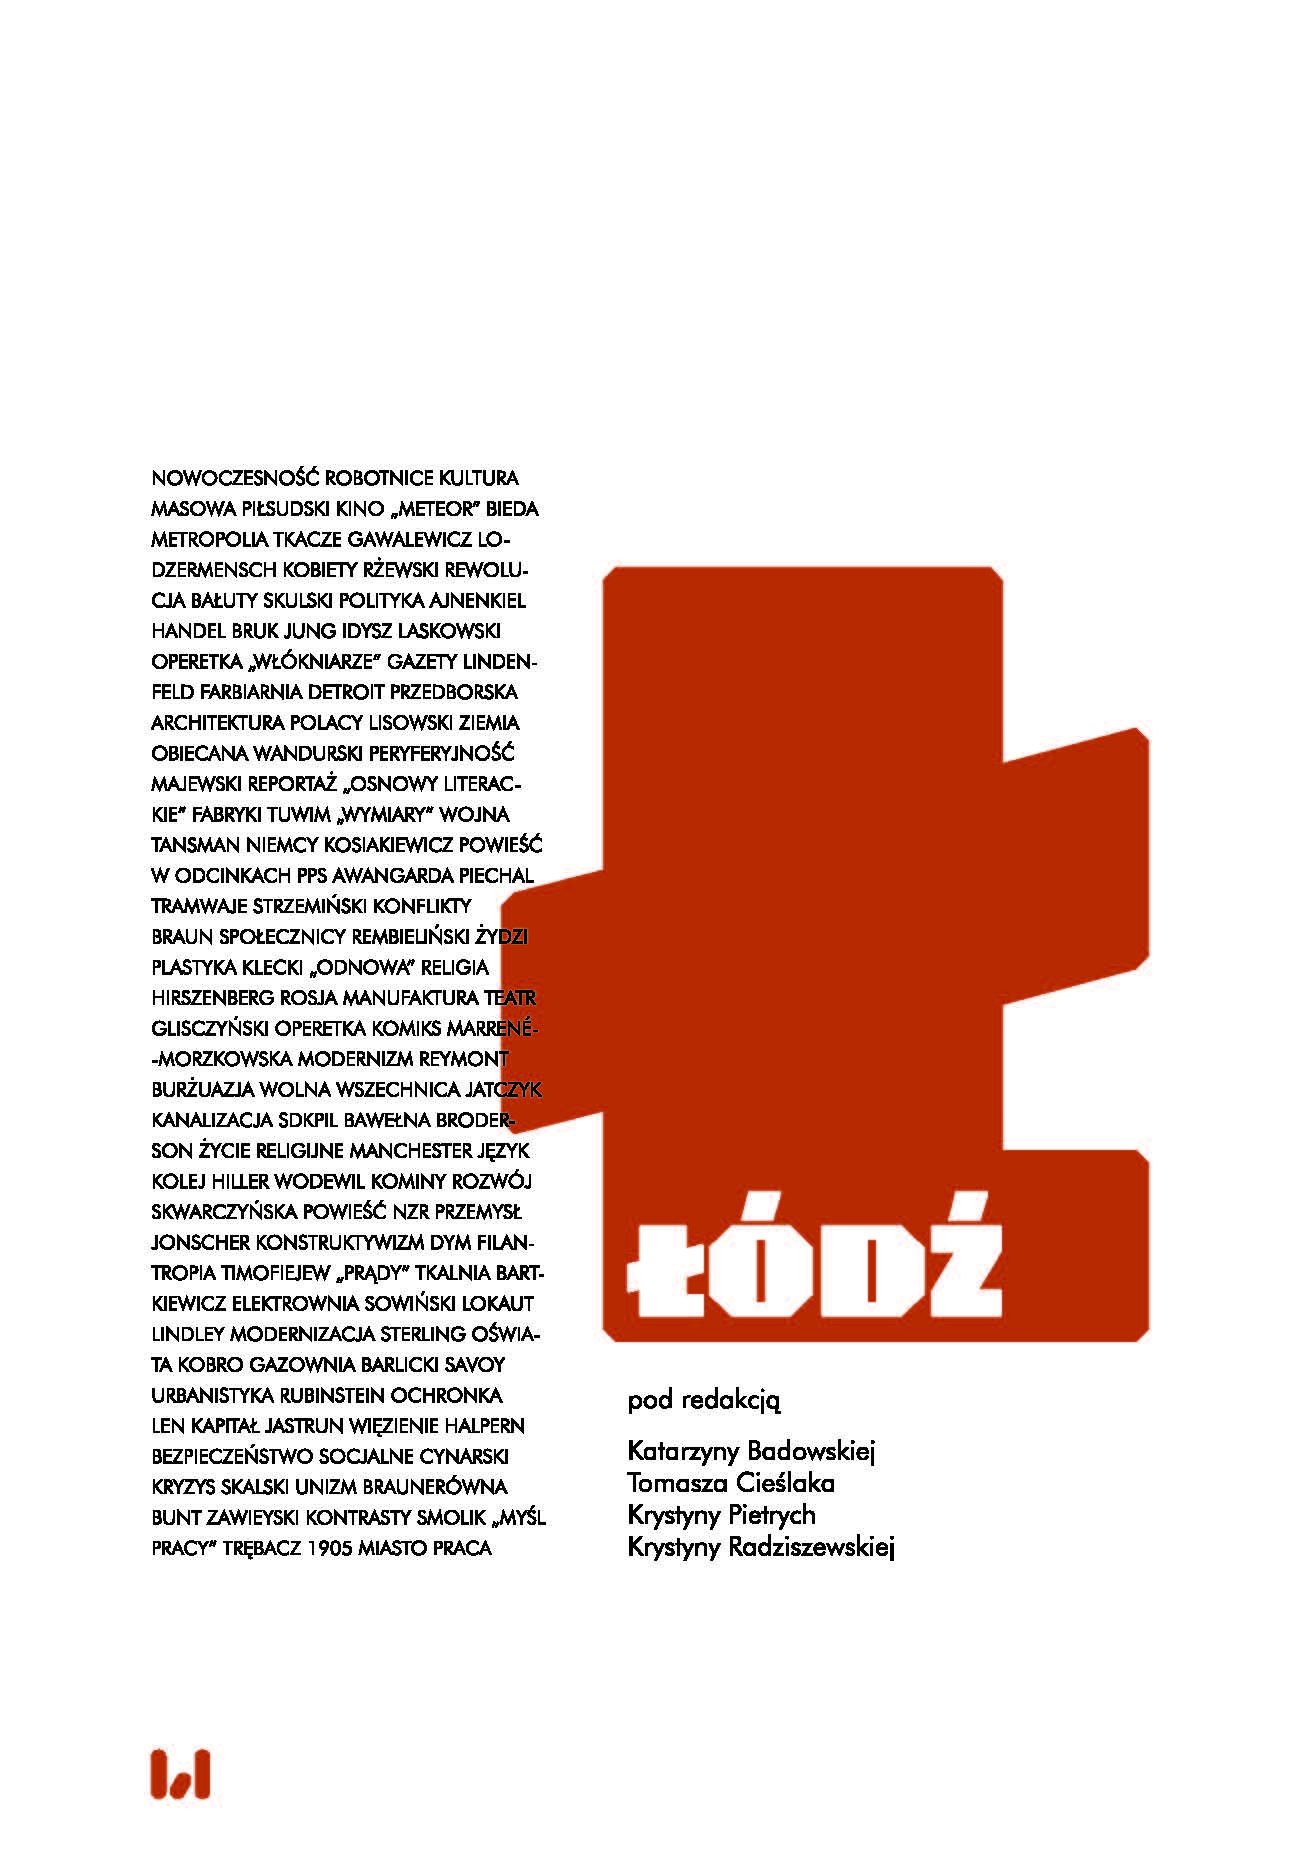 ‘Among the Chimneys of Łódź’ – Socially Engaged Poetry by Maria Przedborska Cover Image